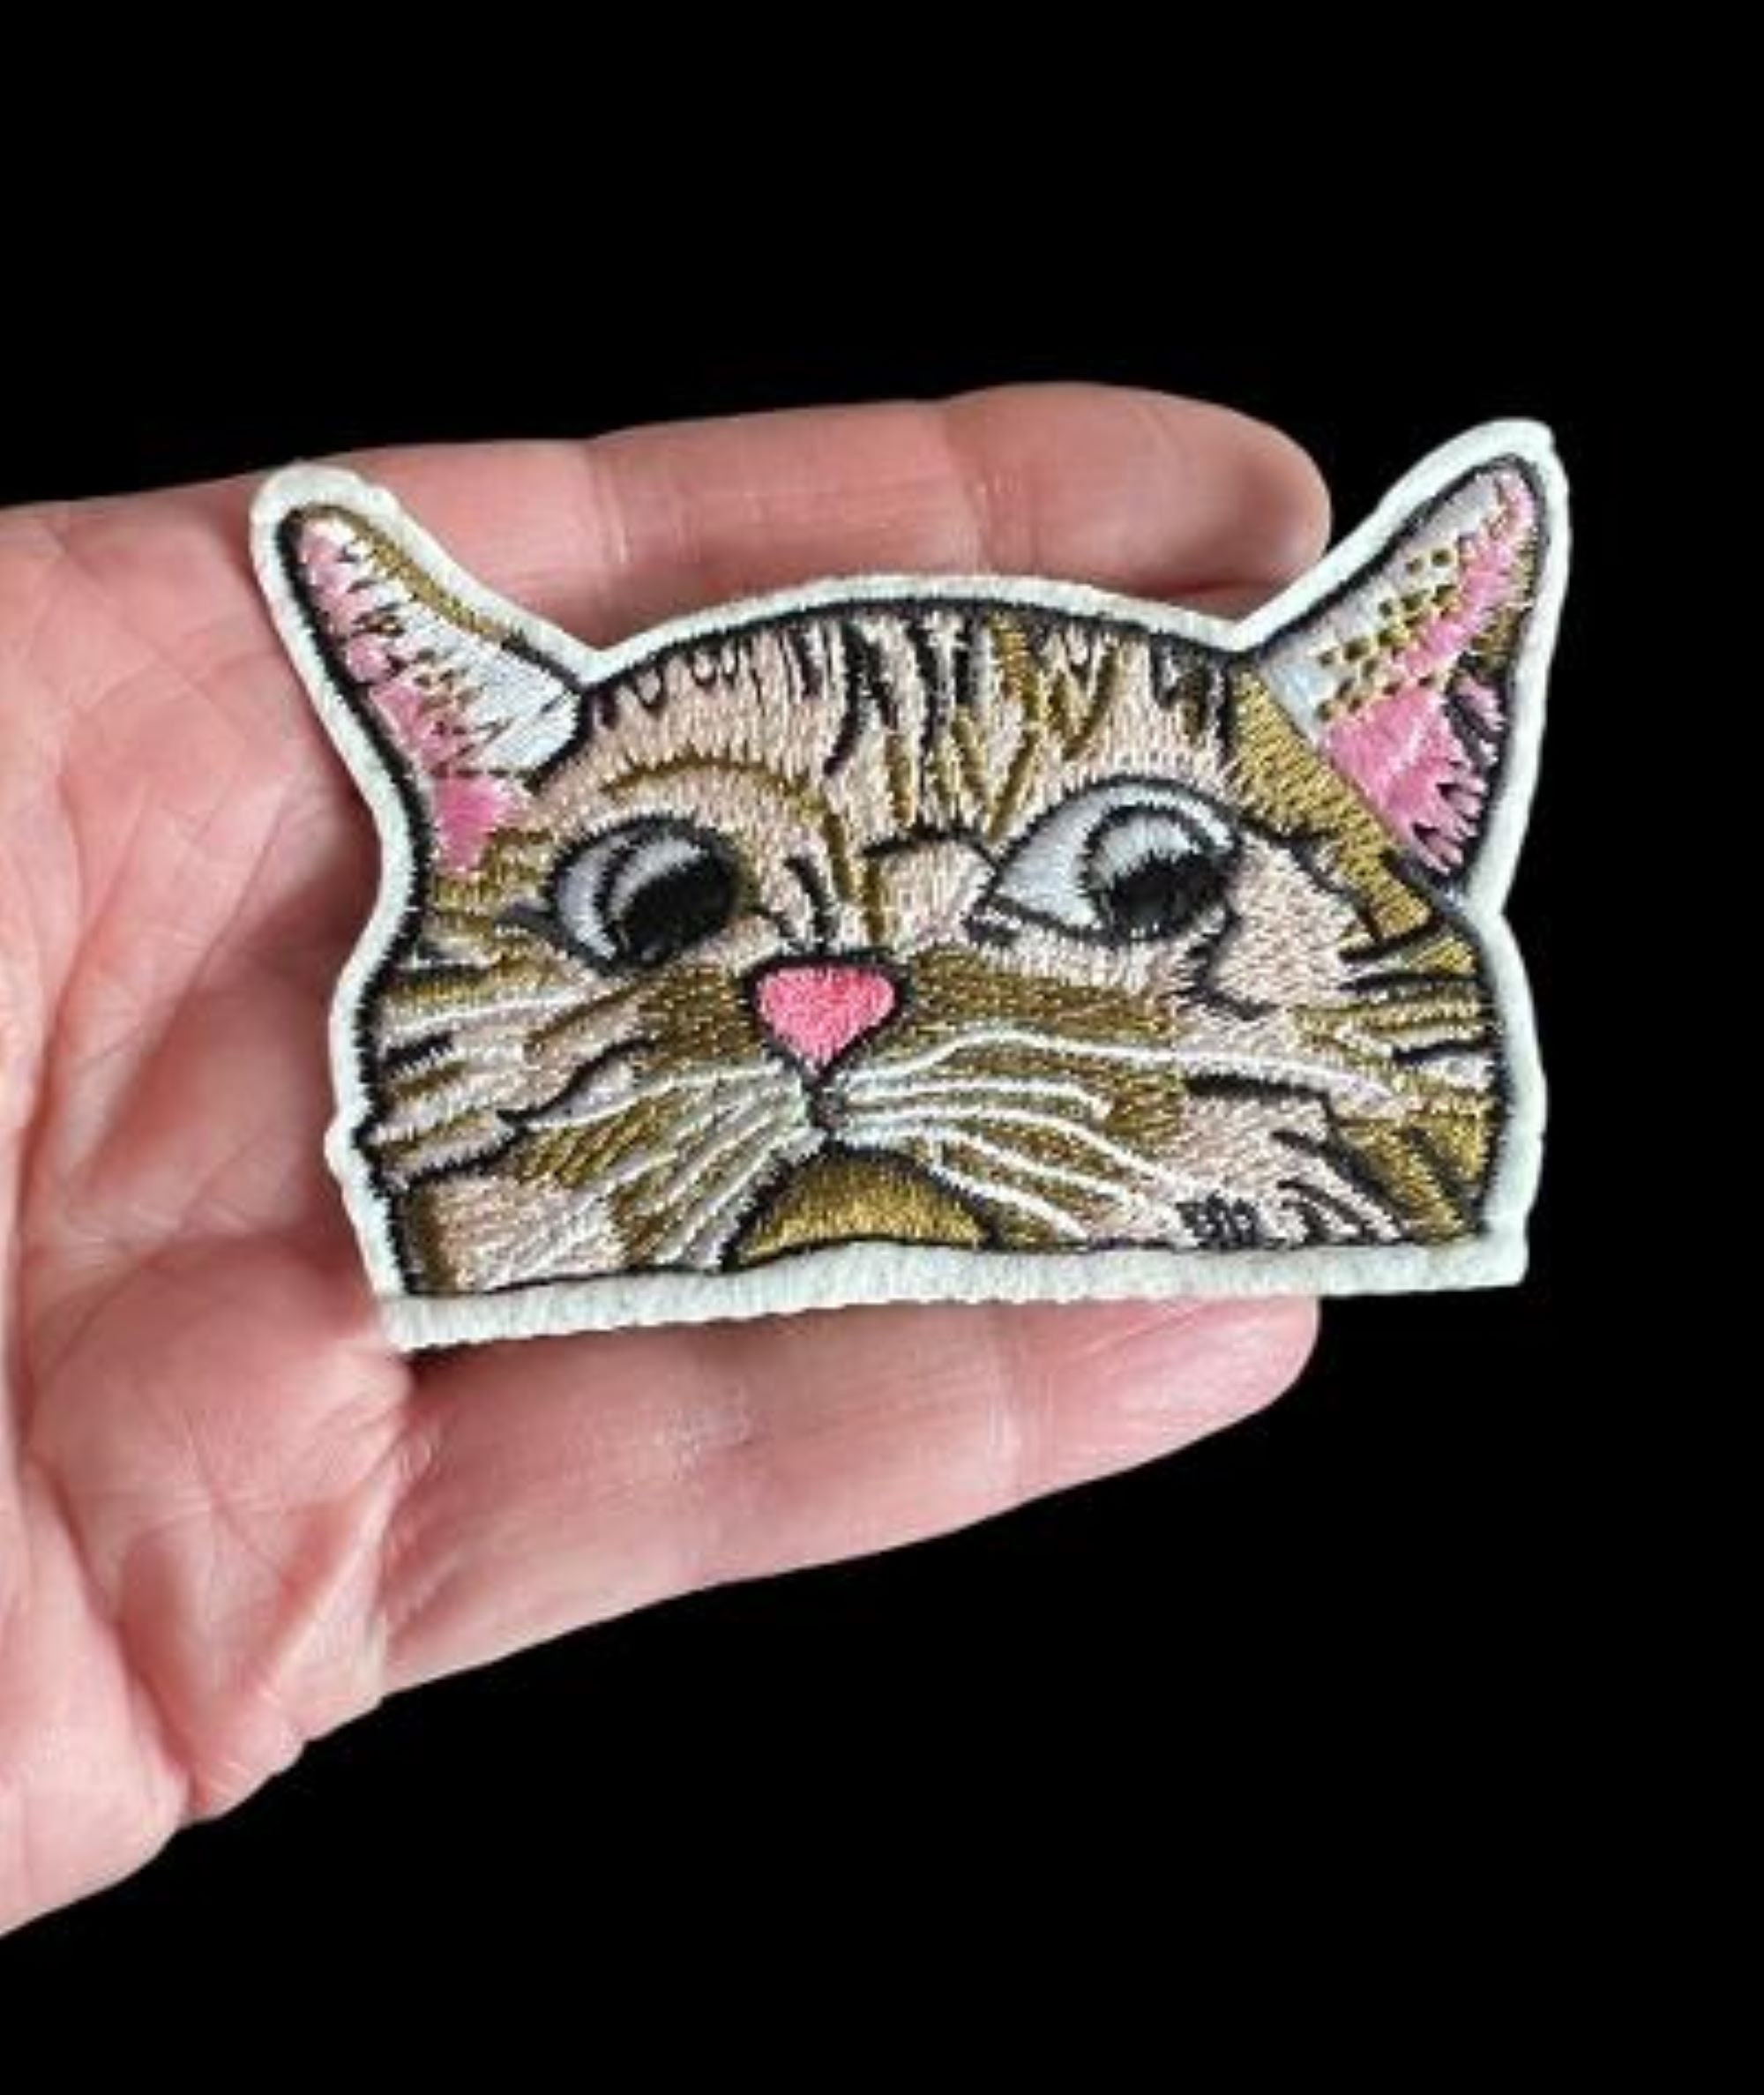 Bicolor Cat Embroidered Iron On Patch Set. Cute Kitten Appliques